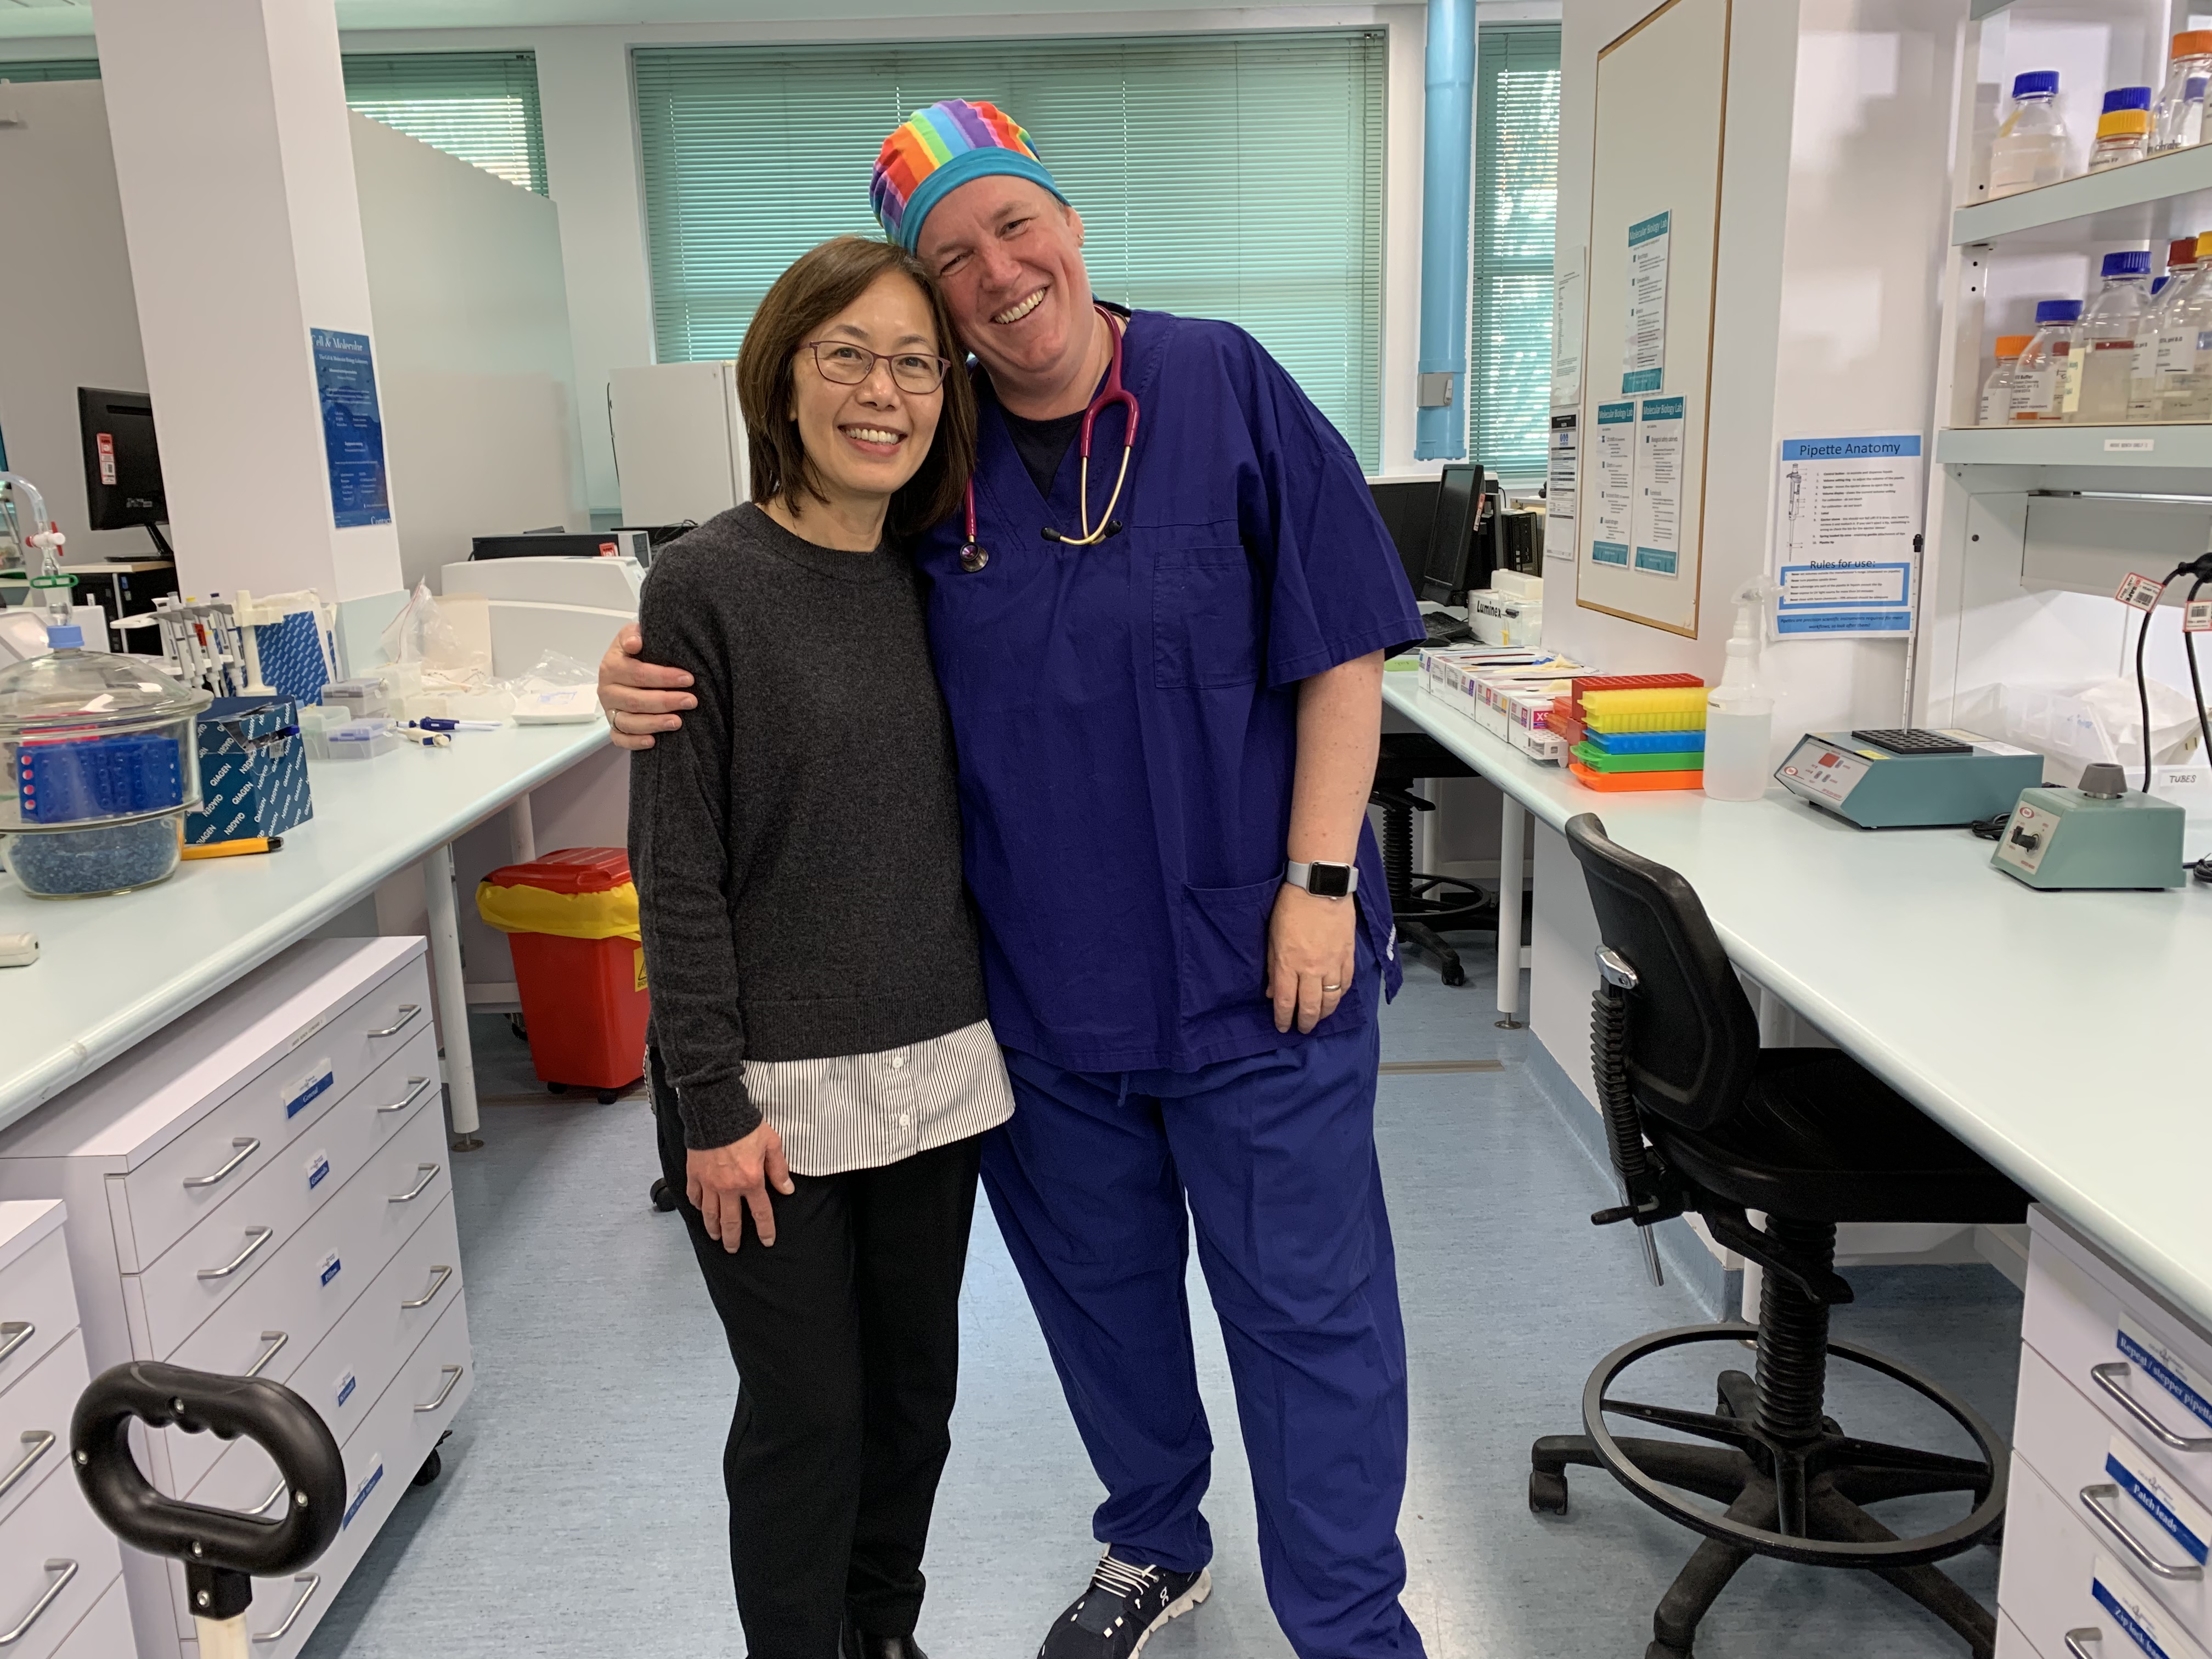 PCH Consultant Paediatric Anaesthetist and Chair of Paediatric Anaesthesia at UWA Professor Britta von Ungern-Sternberg and UWA Professor of Pharmaceutics Lee Yong Lim